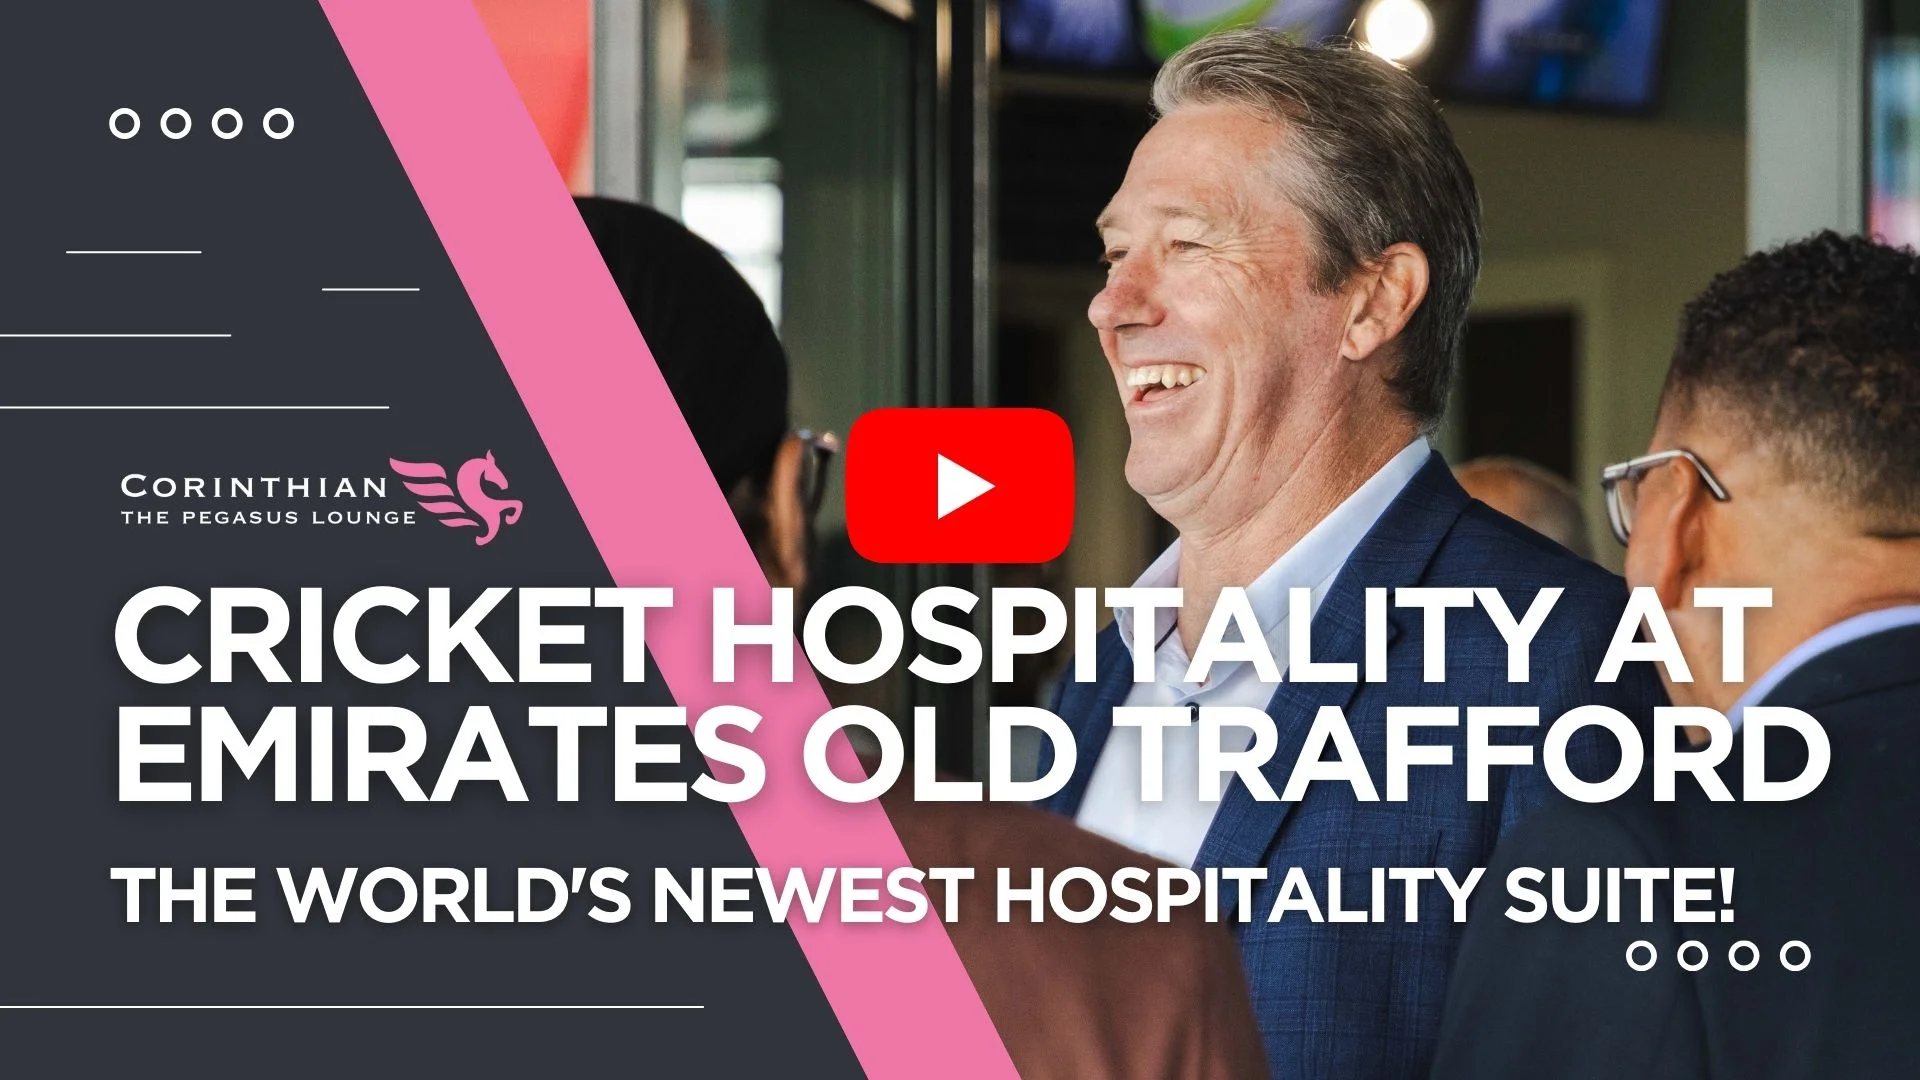 Emirates Old Trafford Hospitality Video